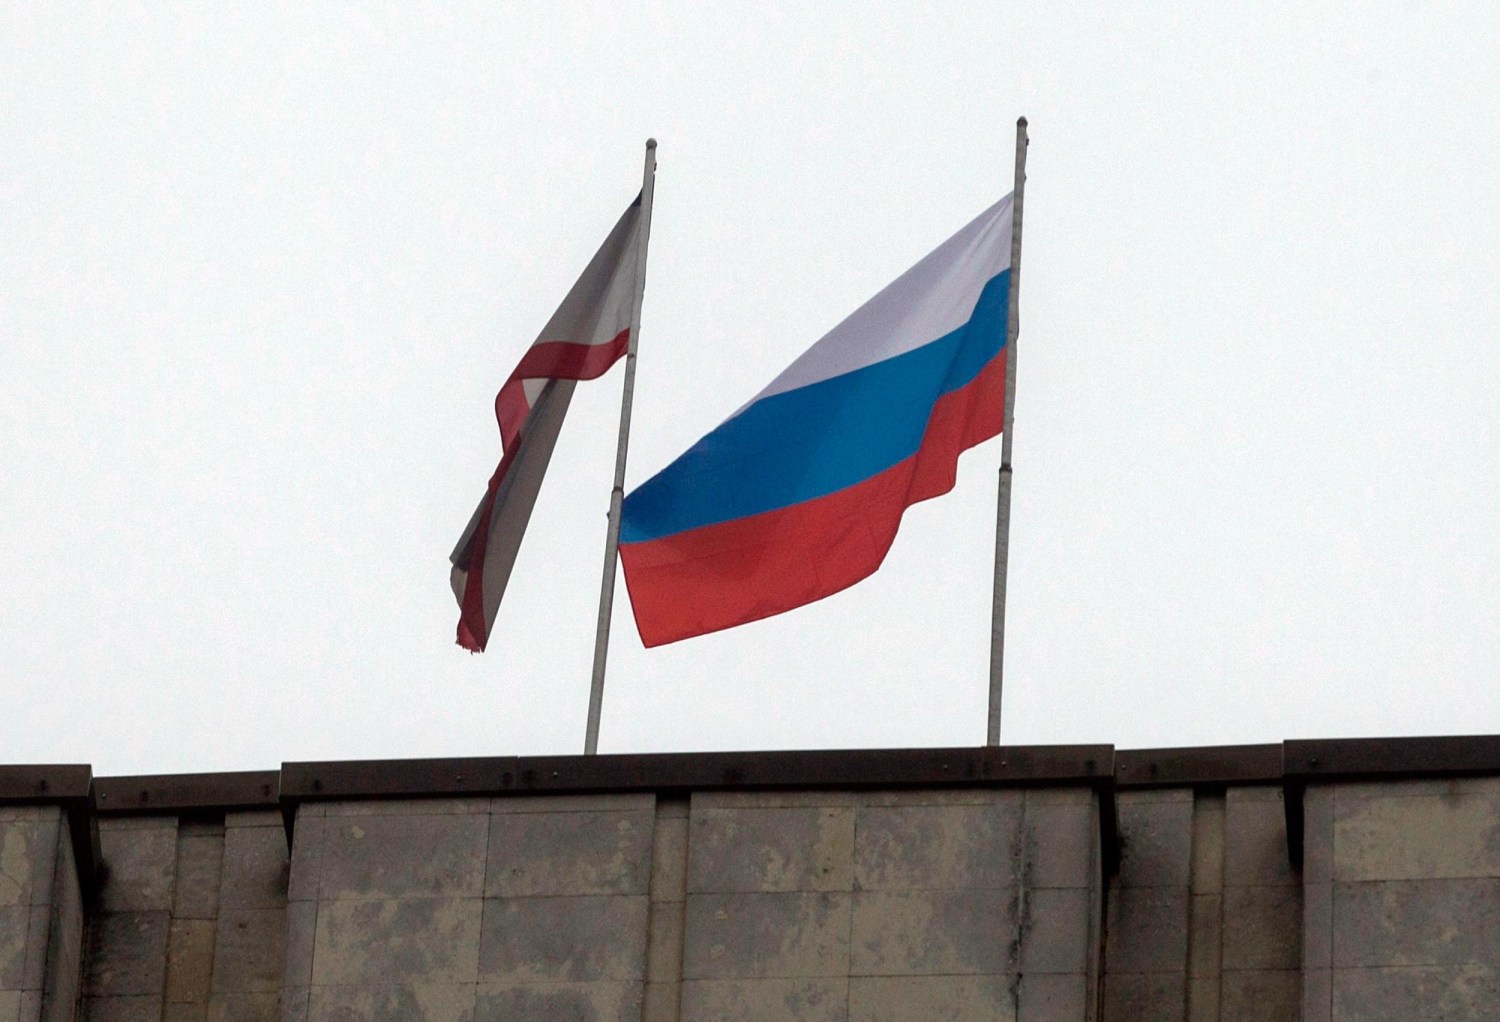 The Russian flag keeps getting stolen from the parkway. Now there's a  petition to officially remove it.